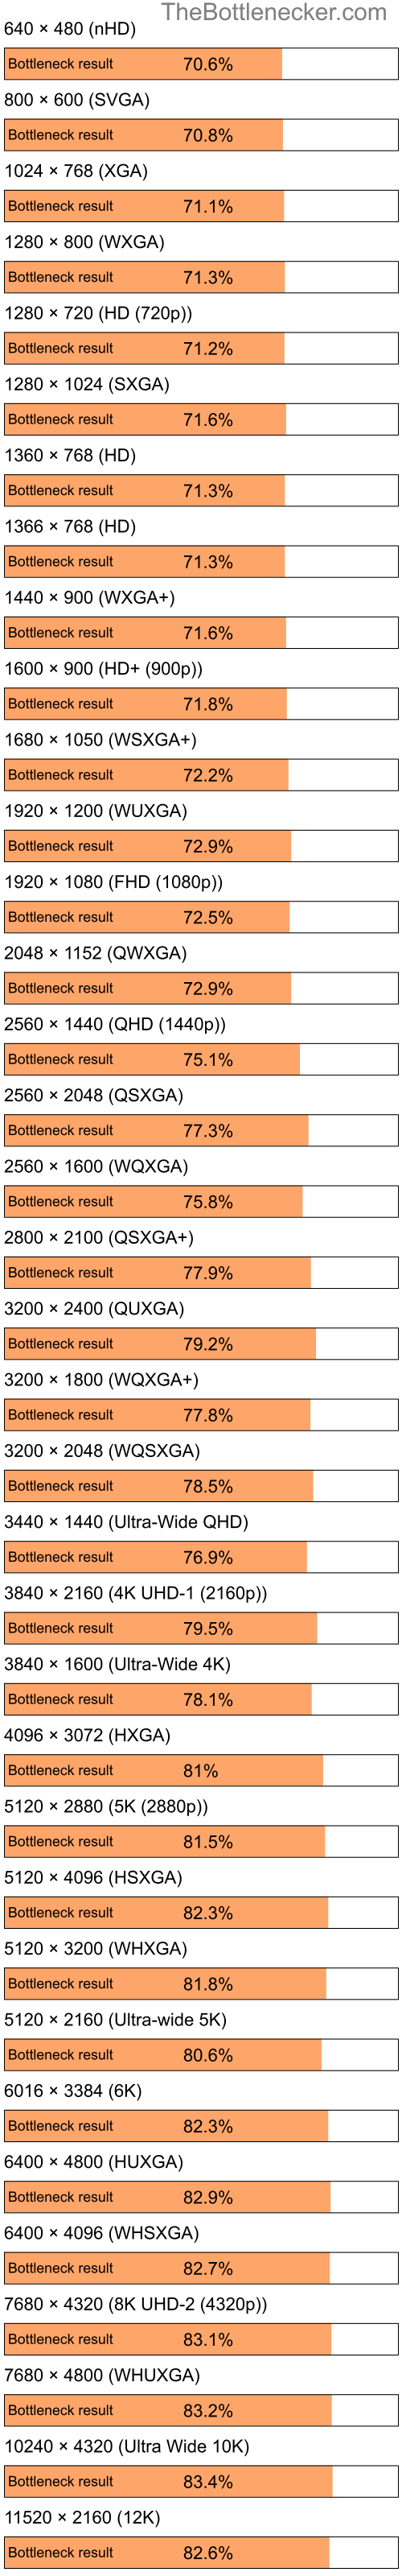 Bottleneck results by resolution for Intel Pentium 4 and AMD Mobility Radeon HD 2300 in7 Days to Die